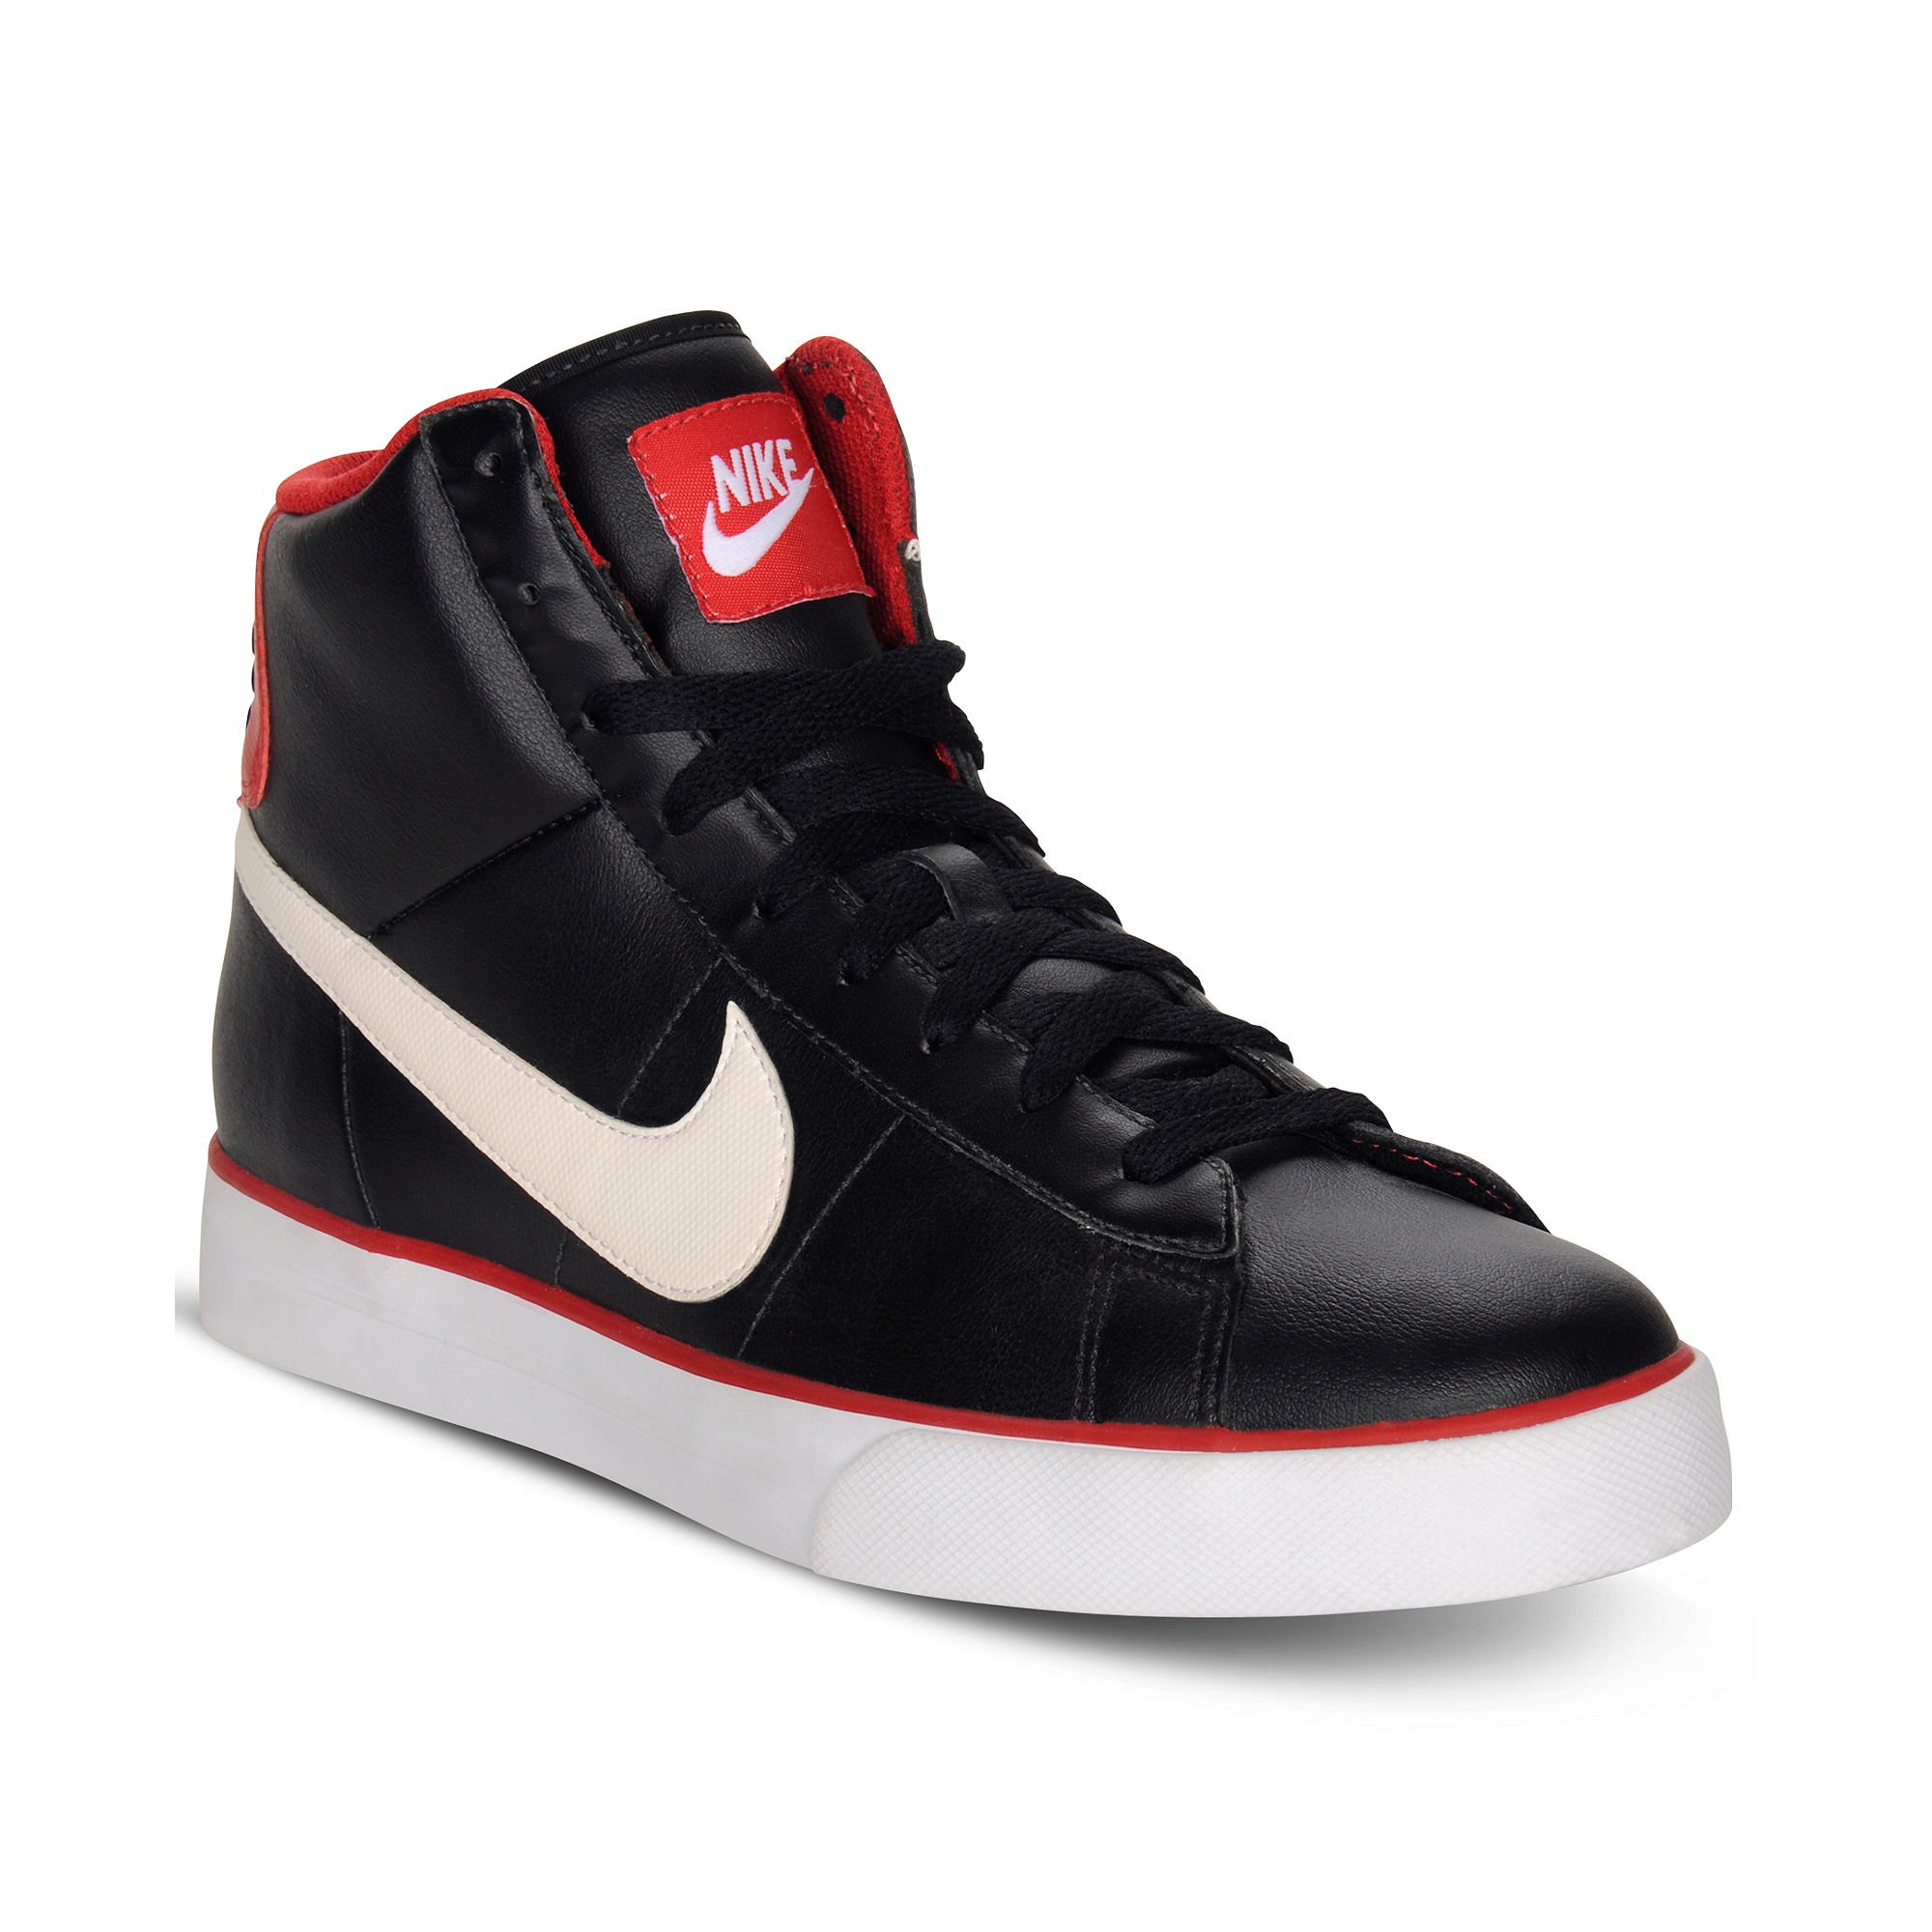 List 101+ Images red white and black high top nikes Full HD, 2k, 4k